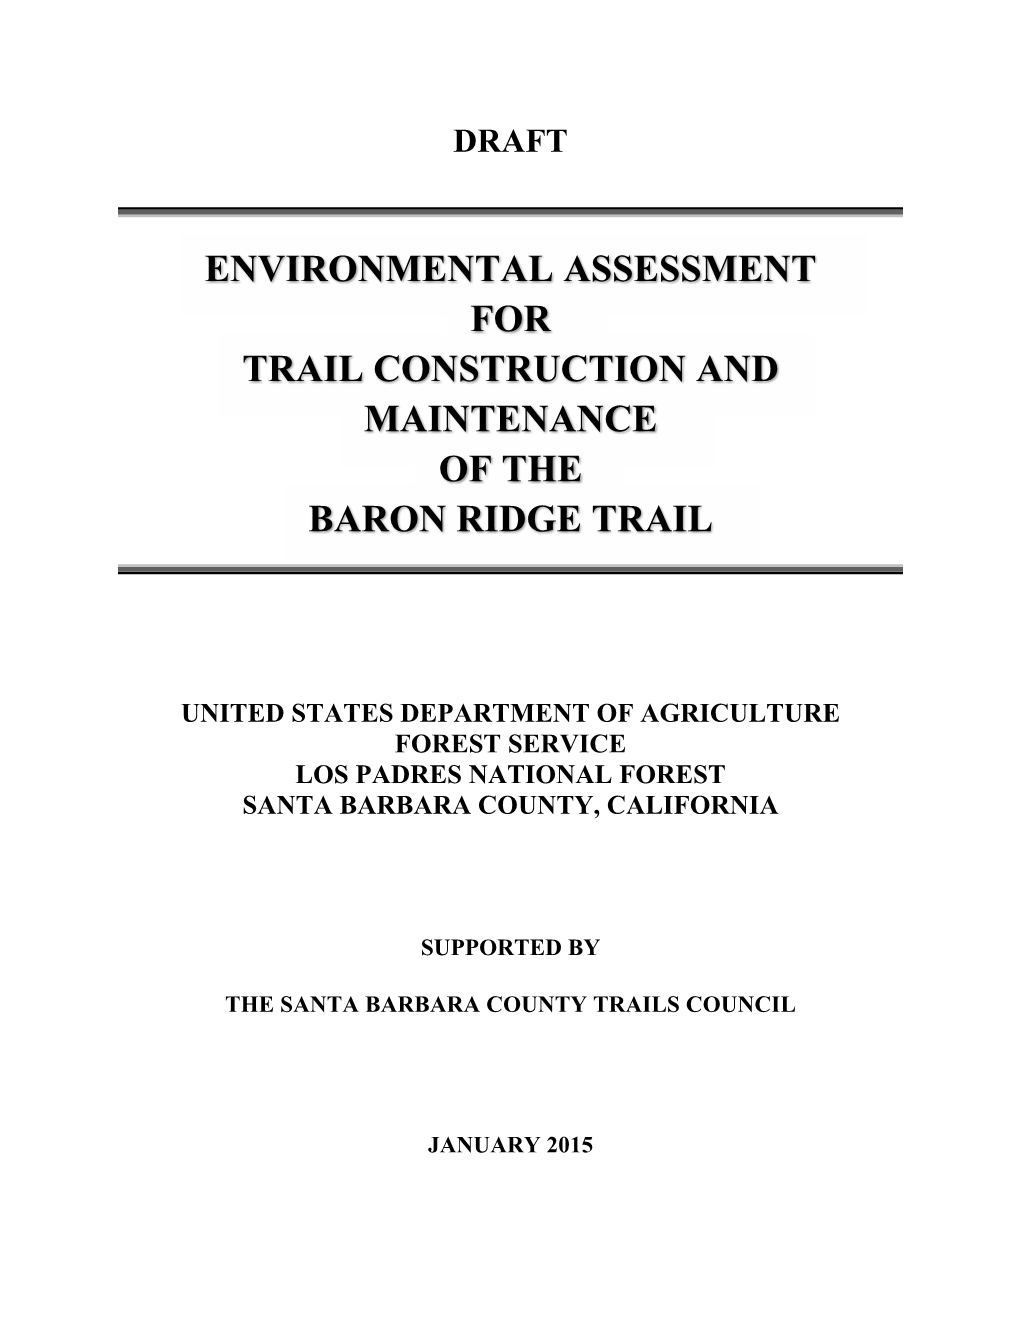 Environmental Assessment for Trail Construction and Maintenance of the Baron Ridge Trail